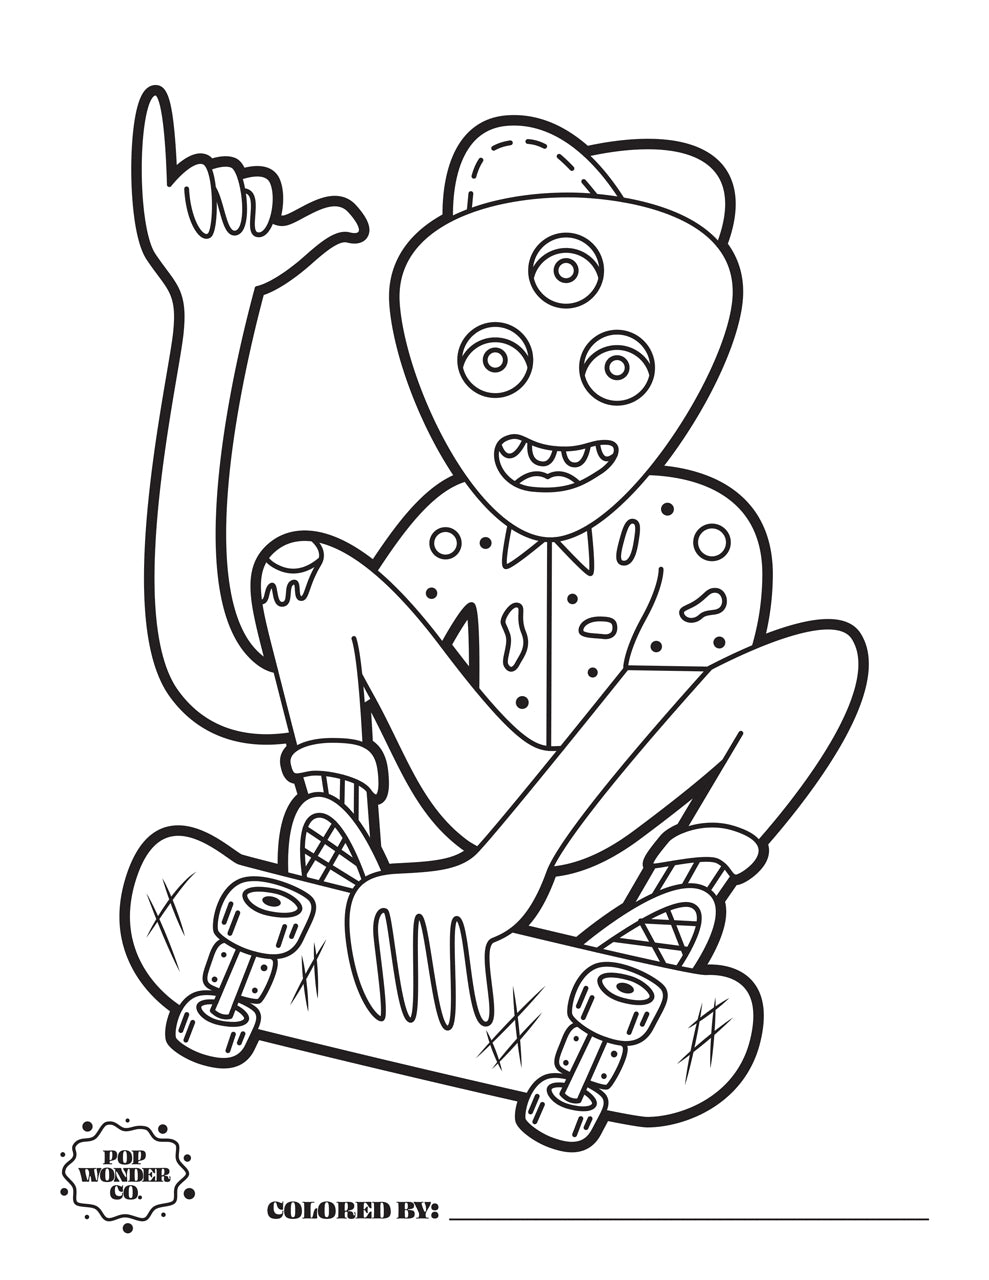 "Rather Cool Aliens & Monsters" Digital Download - Free Coloring Book